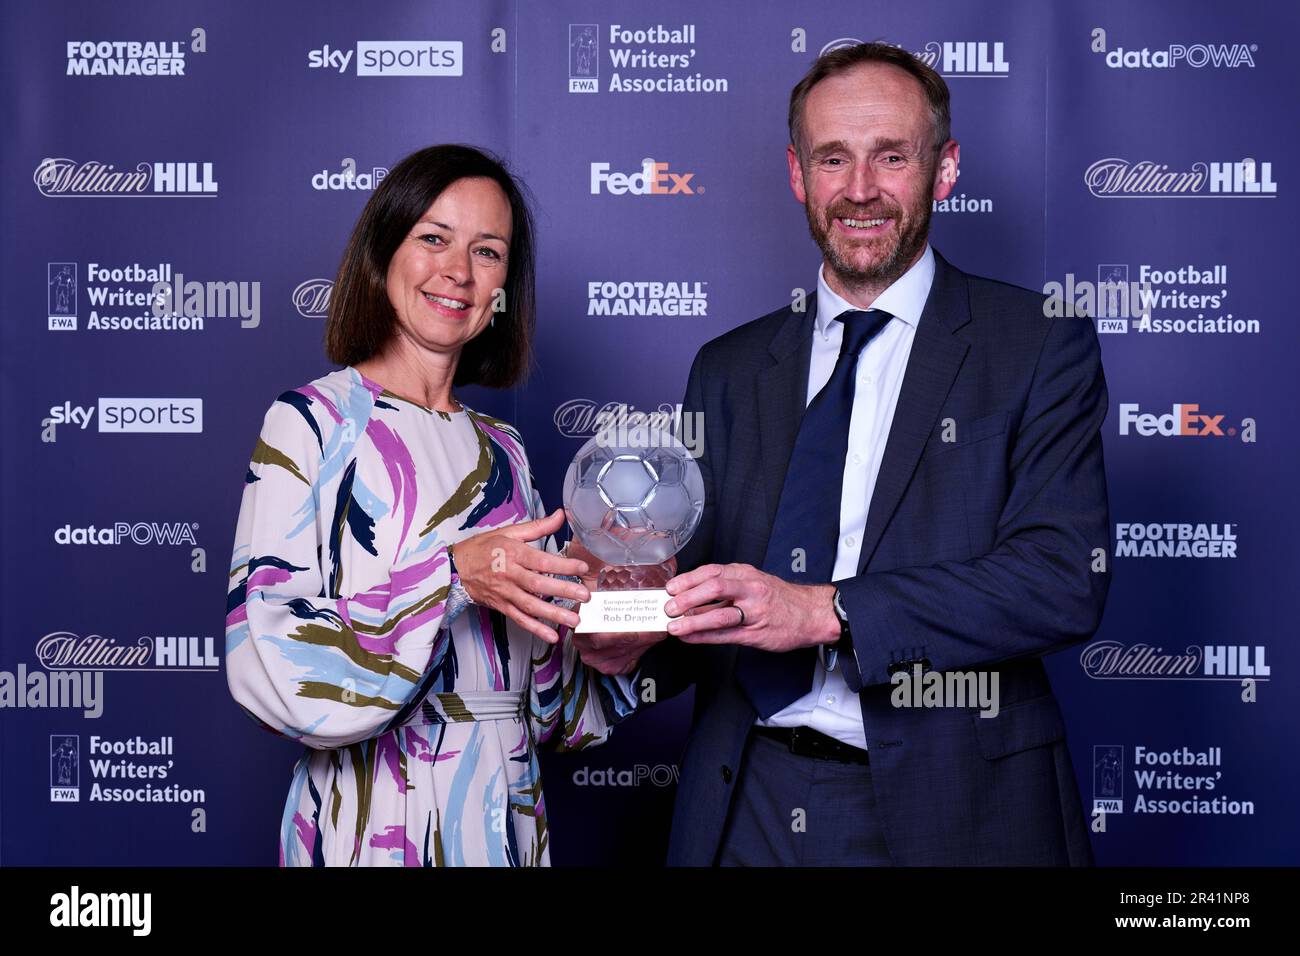 Kaat Vanderheyde (left) managing director of Brand and Sponsorship at FedEx Express Europe presents the Rob Draper of The Mail on Sunday with the European Football Writer of the year award during the FWA Footballer of the Year awards held at the Landmark Hotel, London. Picture date: Thursday May 25, 2023. Stock Photo